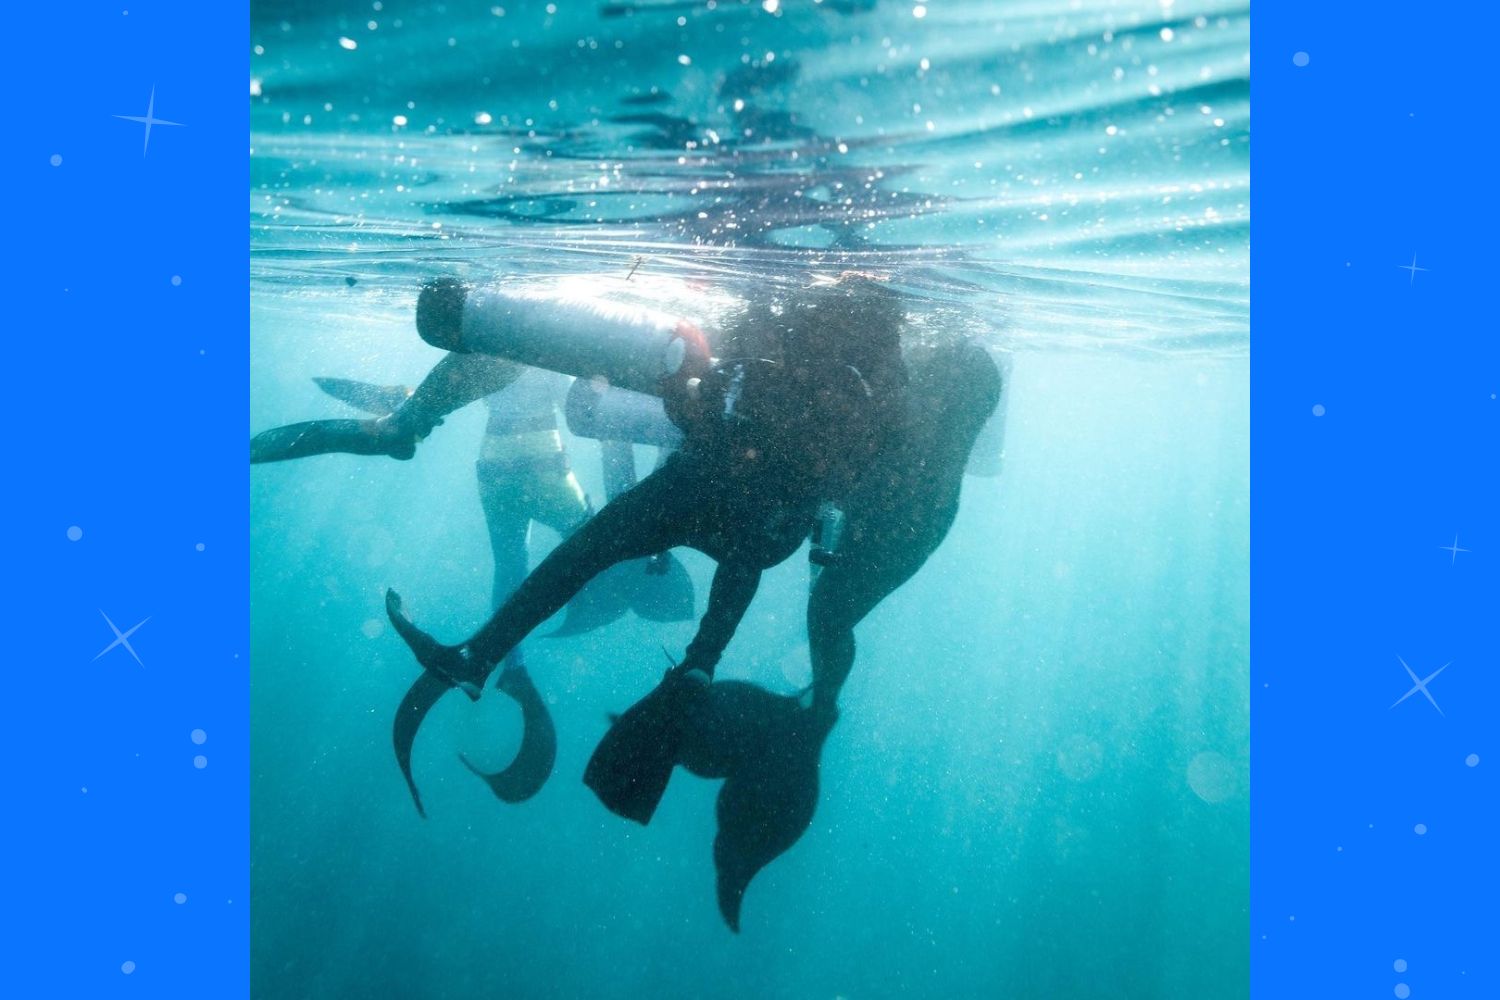 Three mermaids save scuba diver's life after he loses consciousness off coast of California